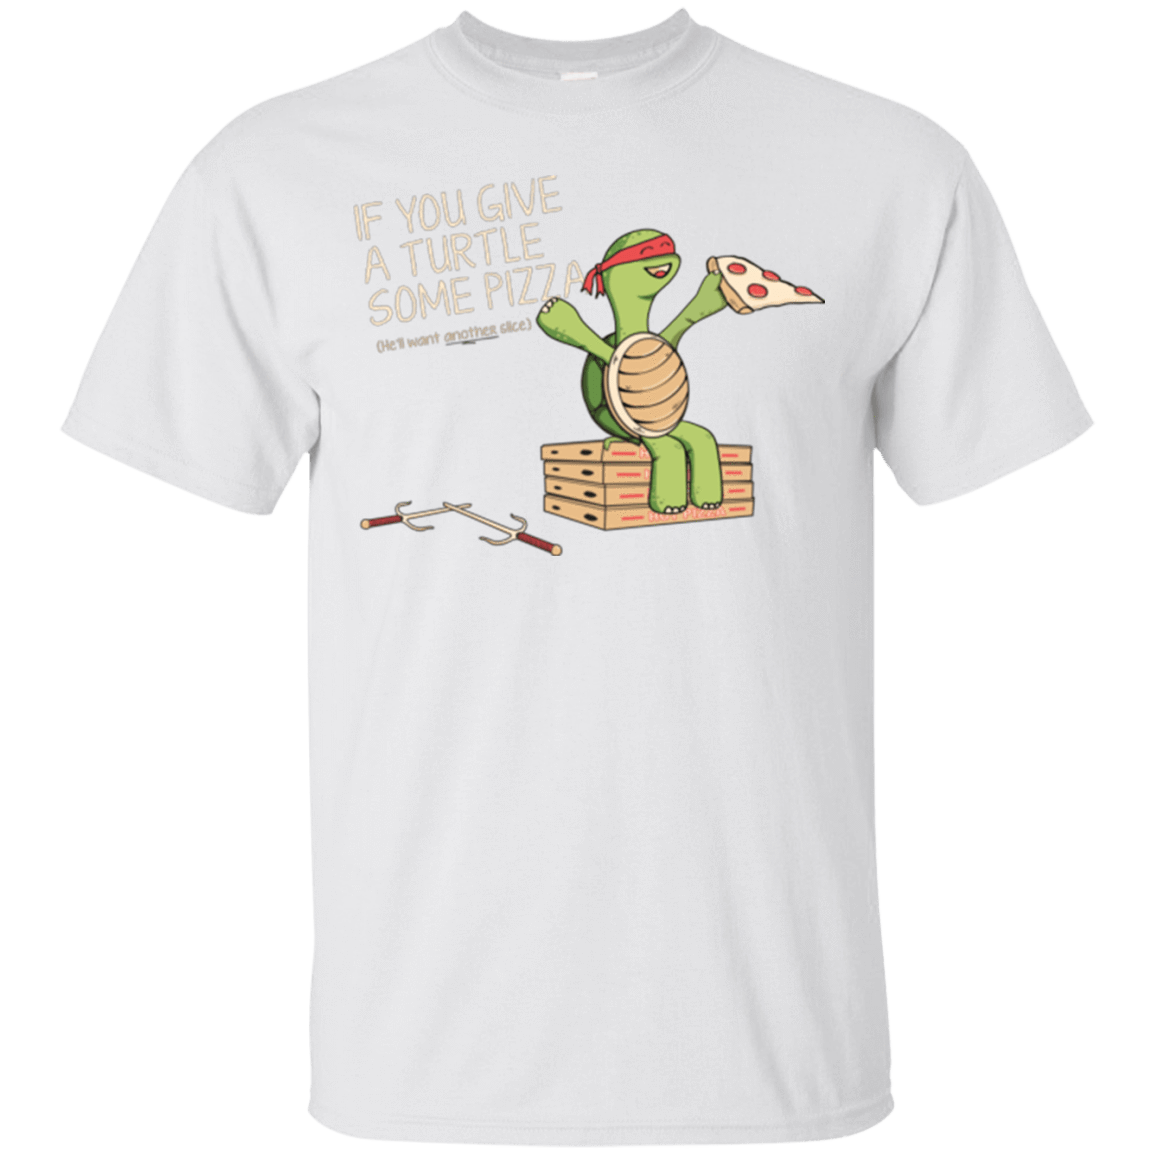 T-Shirts White / Small Give a Turtle T-Shirt